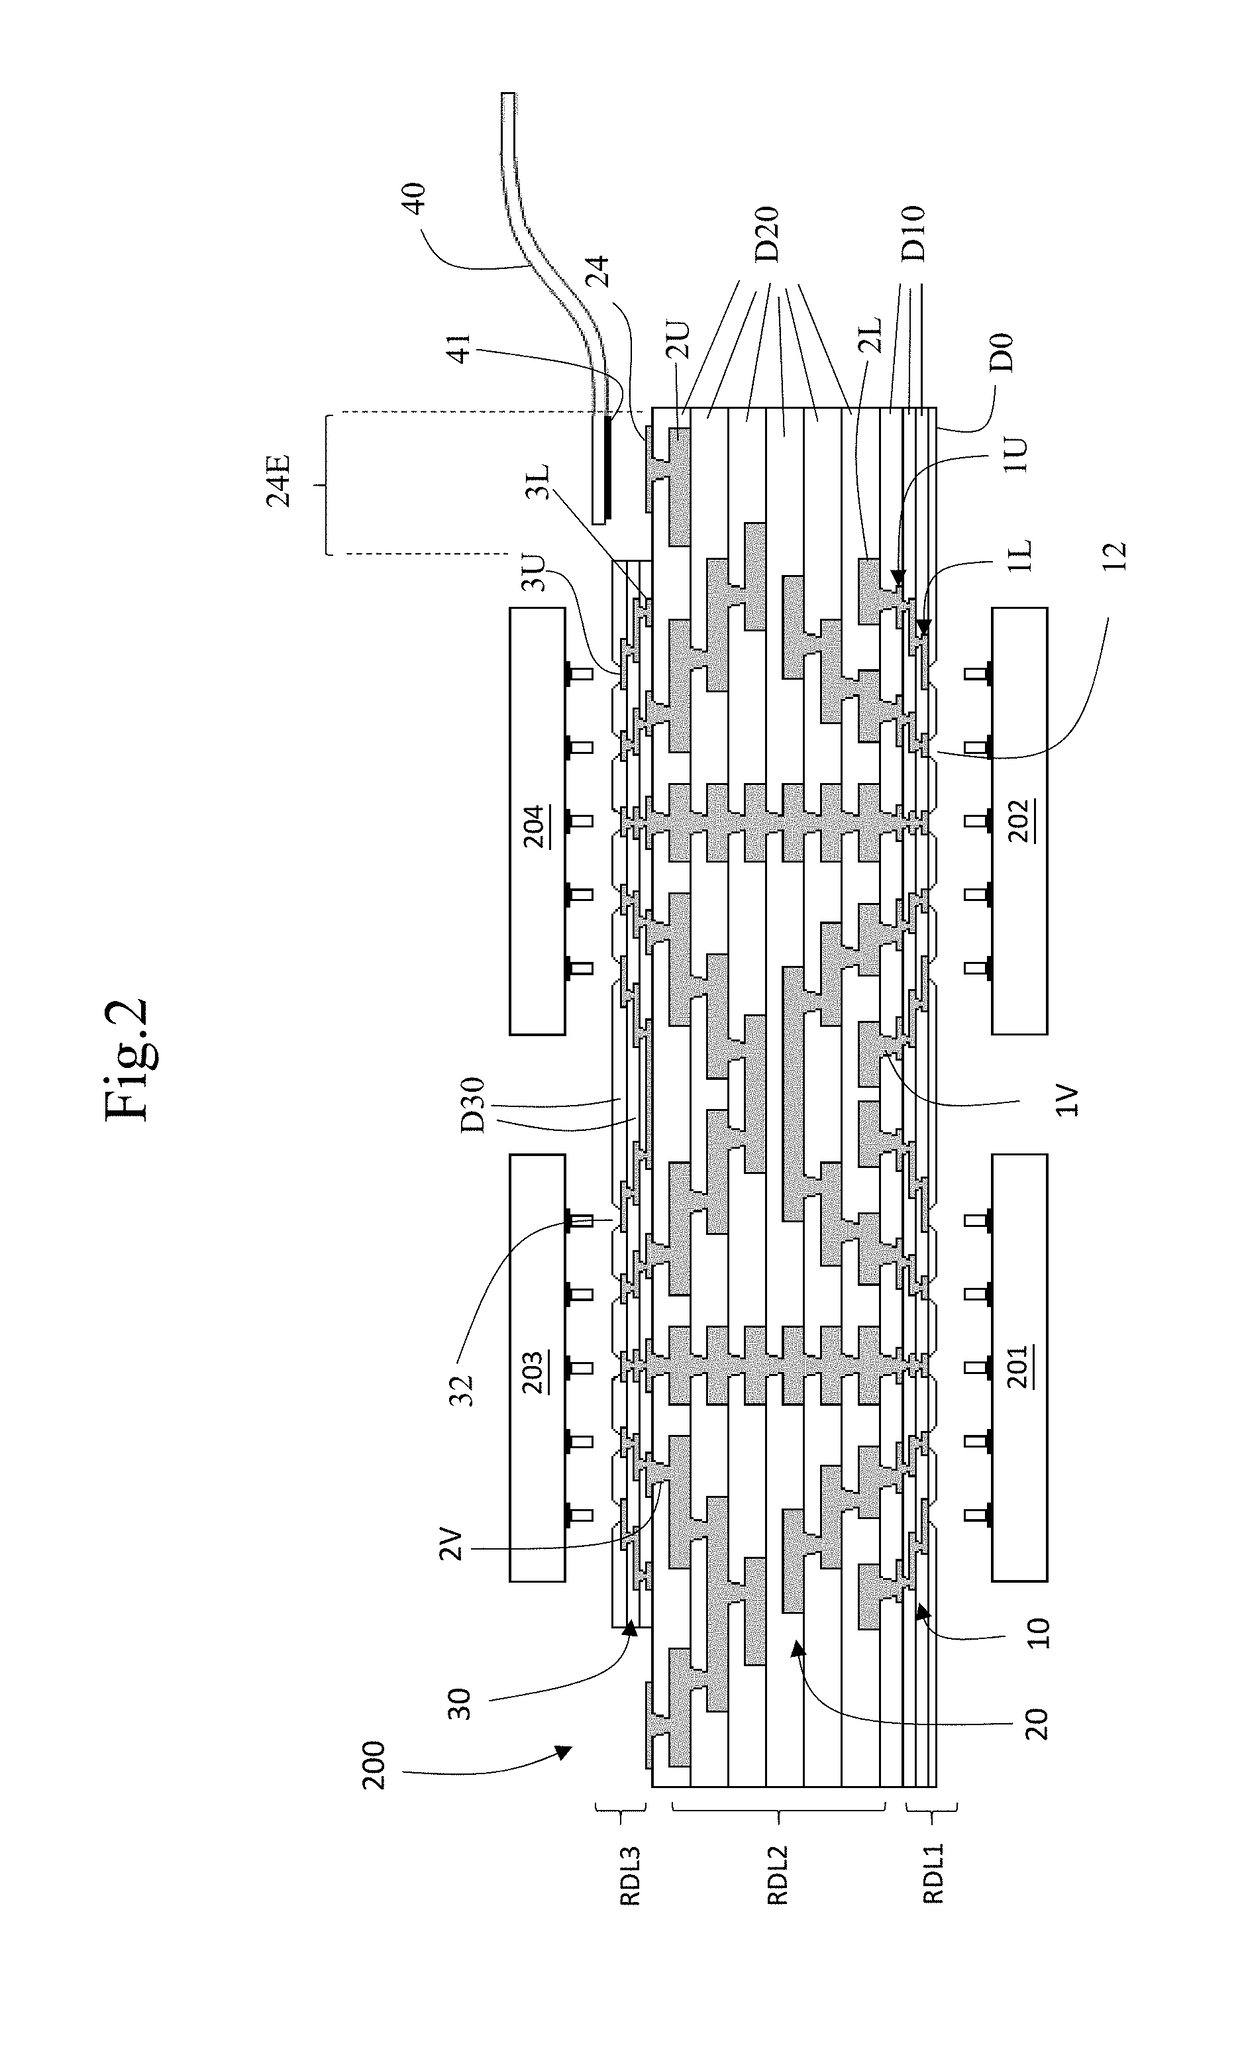 Package substrate with double sided fine line rdl